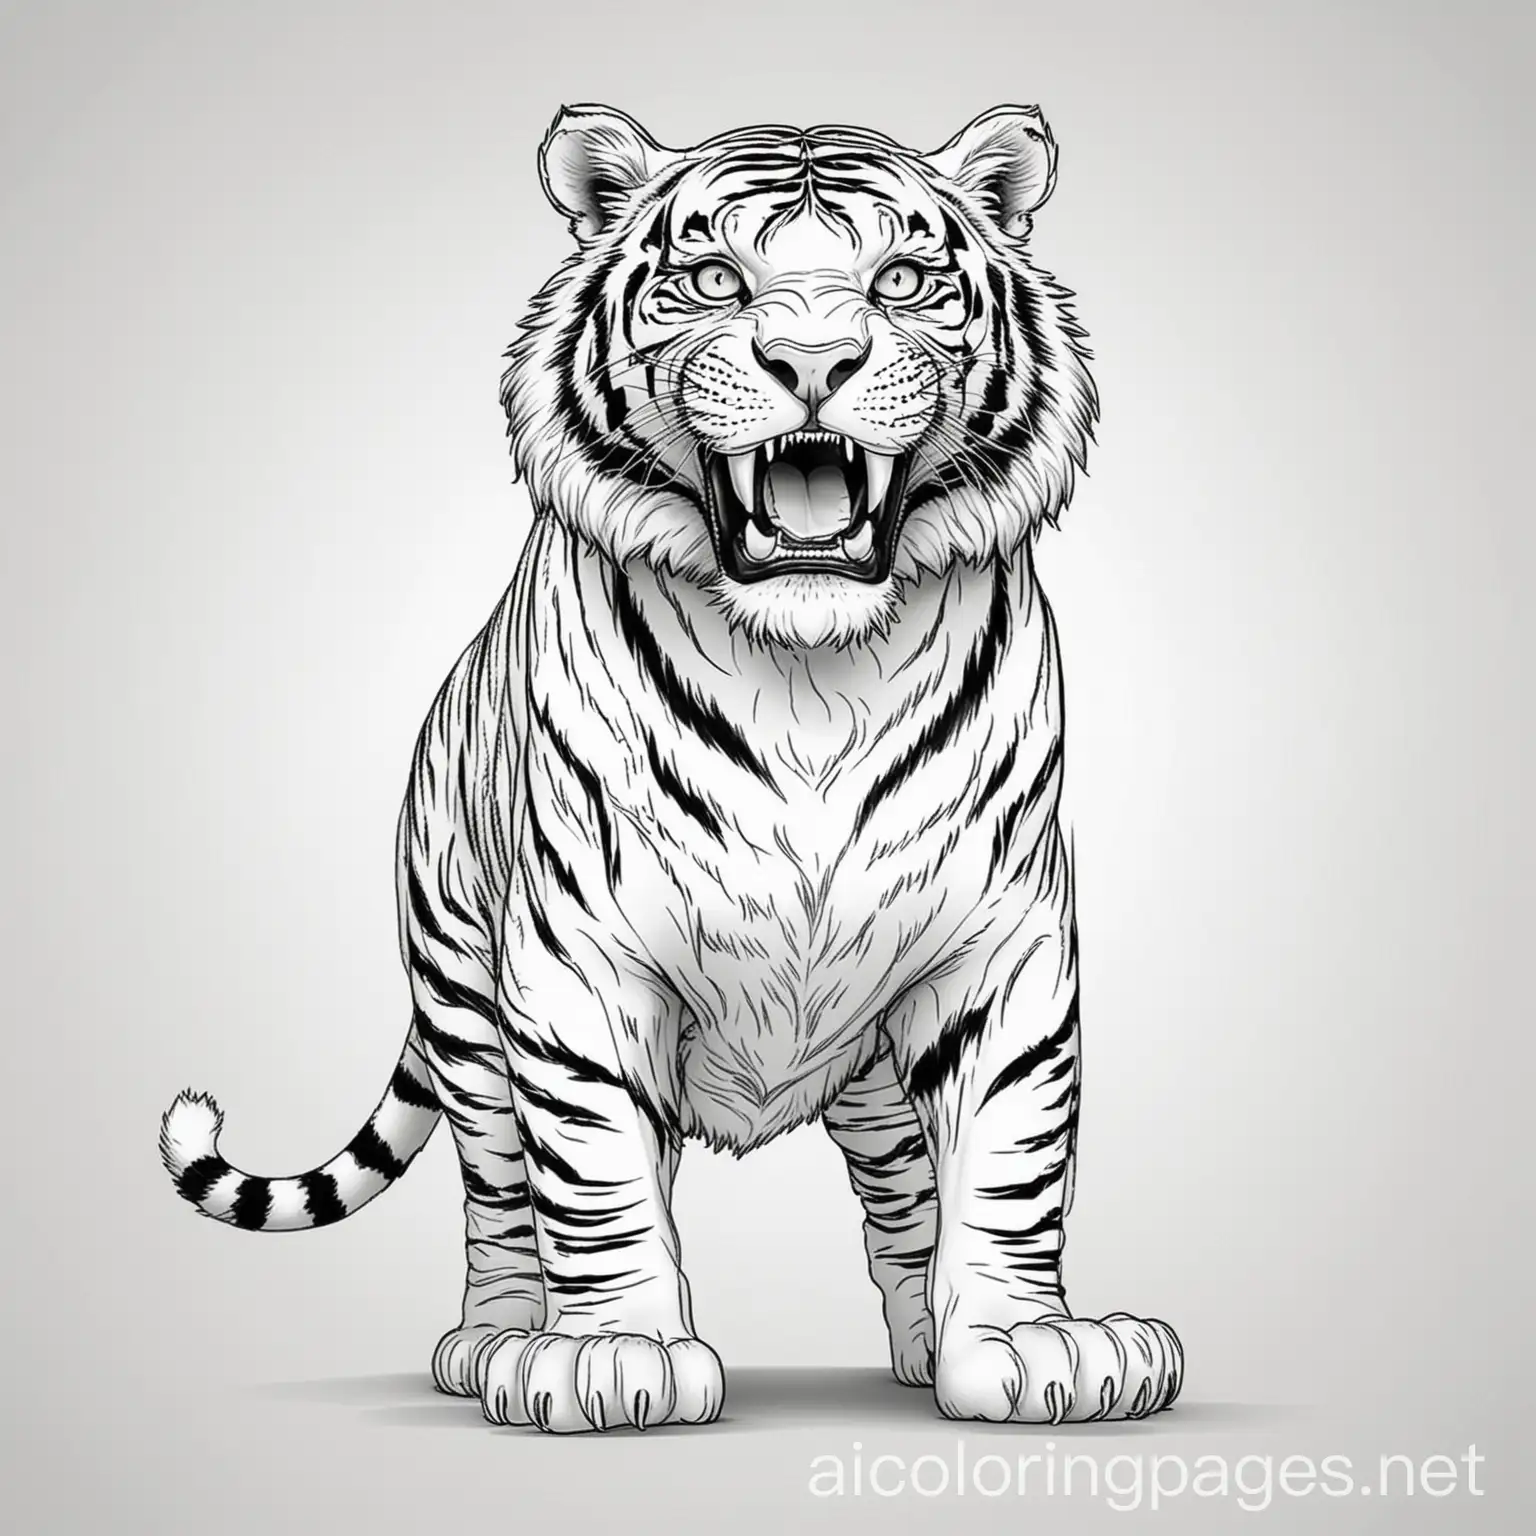 full body of a big big scary tiger who is ready to attack an animal with open mouth. in cartoon syle Coloring Page, black and white, line art, white background, Simplicity, Ample White Space. The background of the coloring page is plain white to make it easy for young children to color within the lines. The outlines of all the subjects are easy to distinguish, making it simple for kids to color without too much difficulty, Coloring Page, black and white, line art, white background, Simplicity, Ample White Space. The background of the coloring page is plain white to make it easy for young children to color within the lines. The outlines of all the subjects are easy to distinguish, making it simple for kids to color without too much difficulty, Coloring Page, black and white, line art, white background, Simplicity, Ample White Space. The background of the coloring page is plain white to make it easy for young children to color within the lines. The outlines of all the subjects are easy to distinguish, making it simple for kids to color without too much difficulty